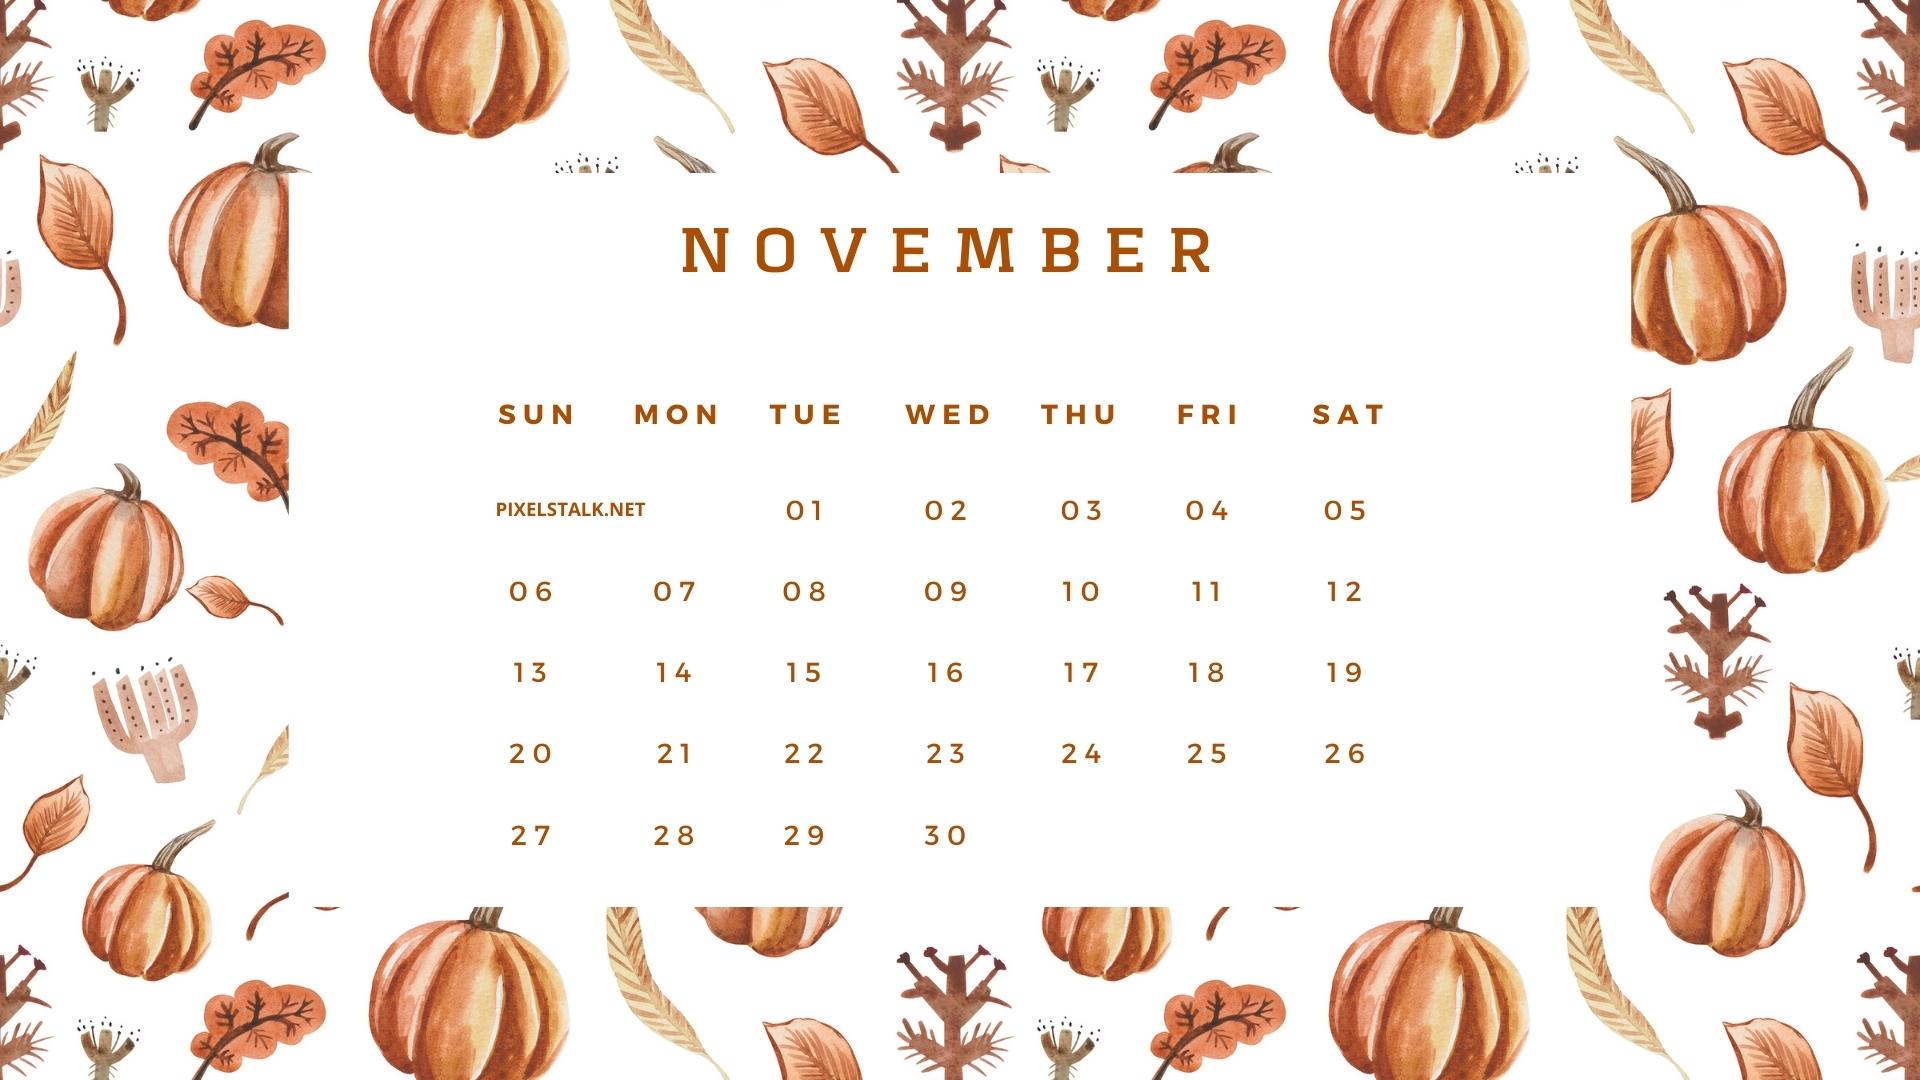 Hãy cùng đón chờ và khám phá! Translation: Download the November 2022 Calendar Backgrounds HD on PixelsTalk.Net and you won\'t be disappointed. With a realistic view almost like reality, you will feel like walking on a modern street, admiring the magical flowers and feeling the atmosphere of November. Let\'s wait and discover!